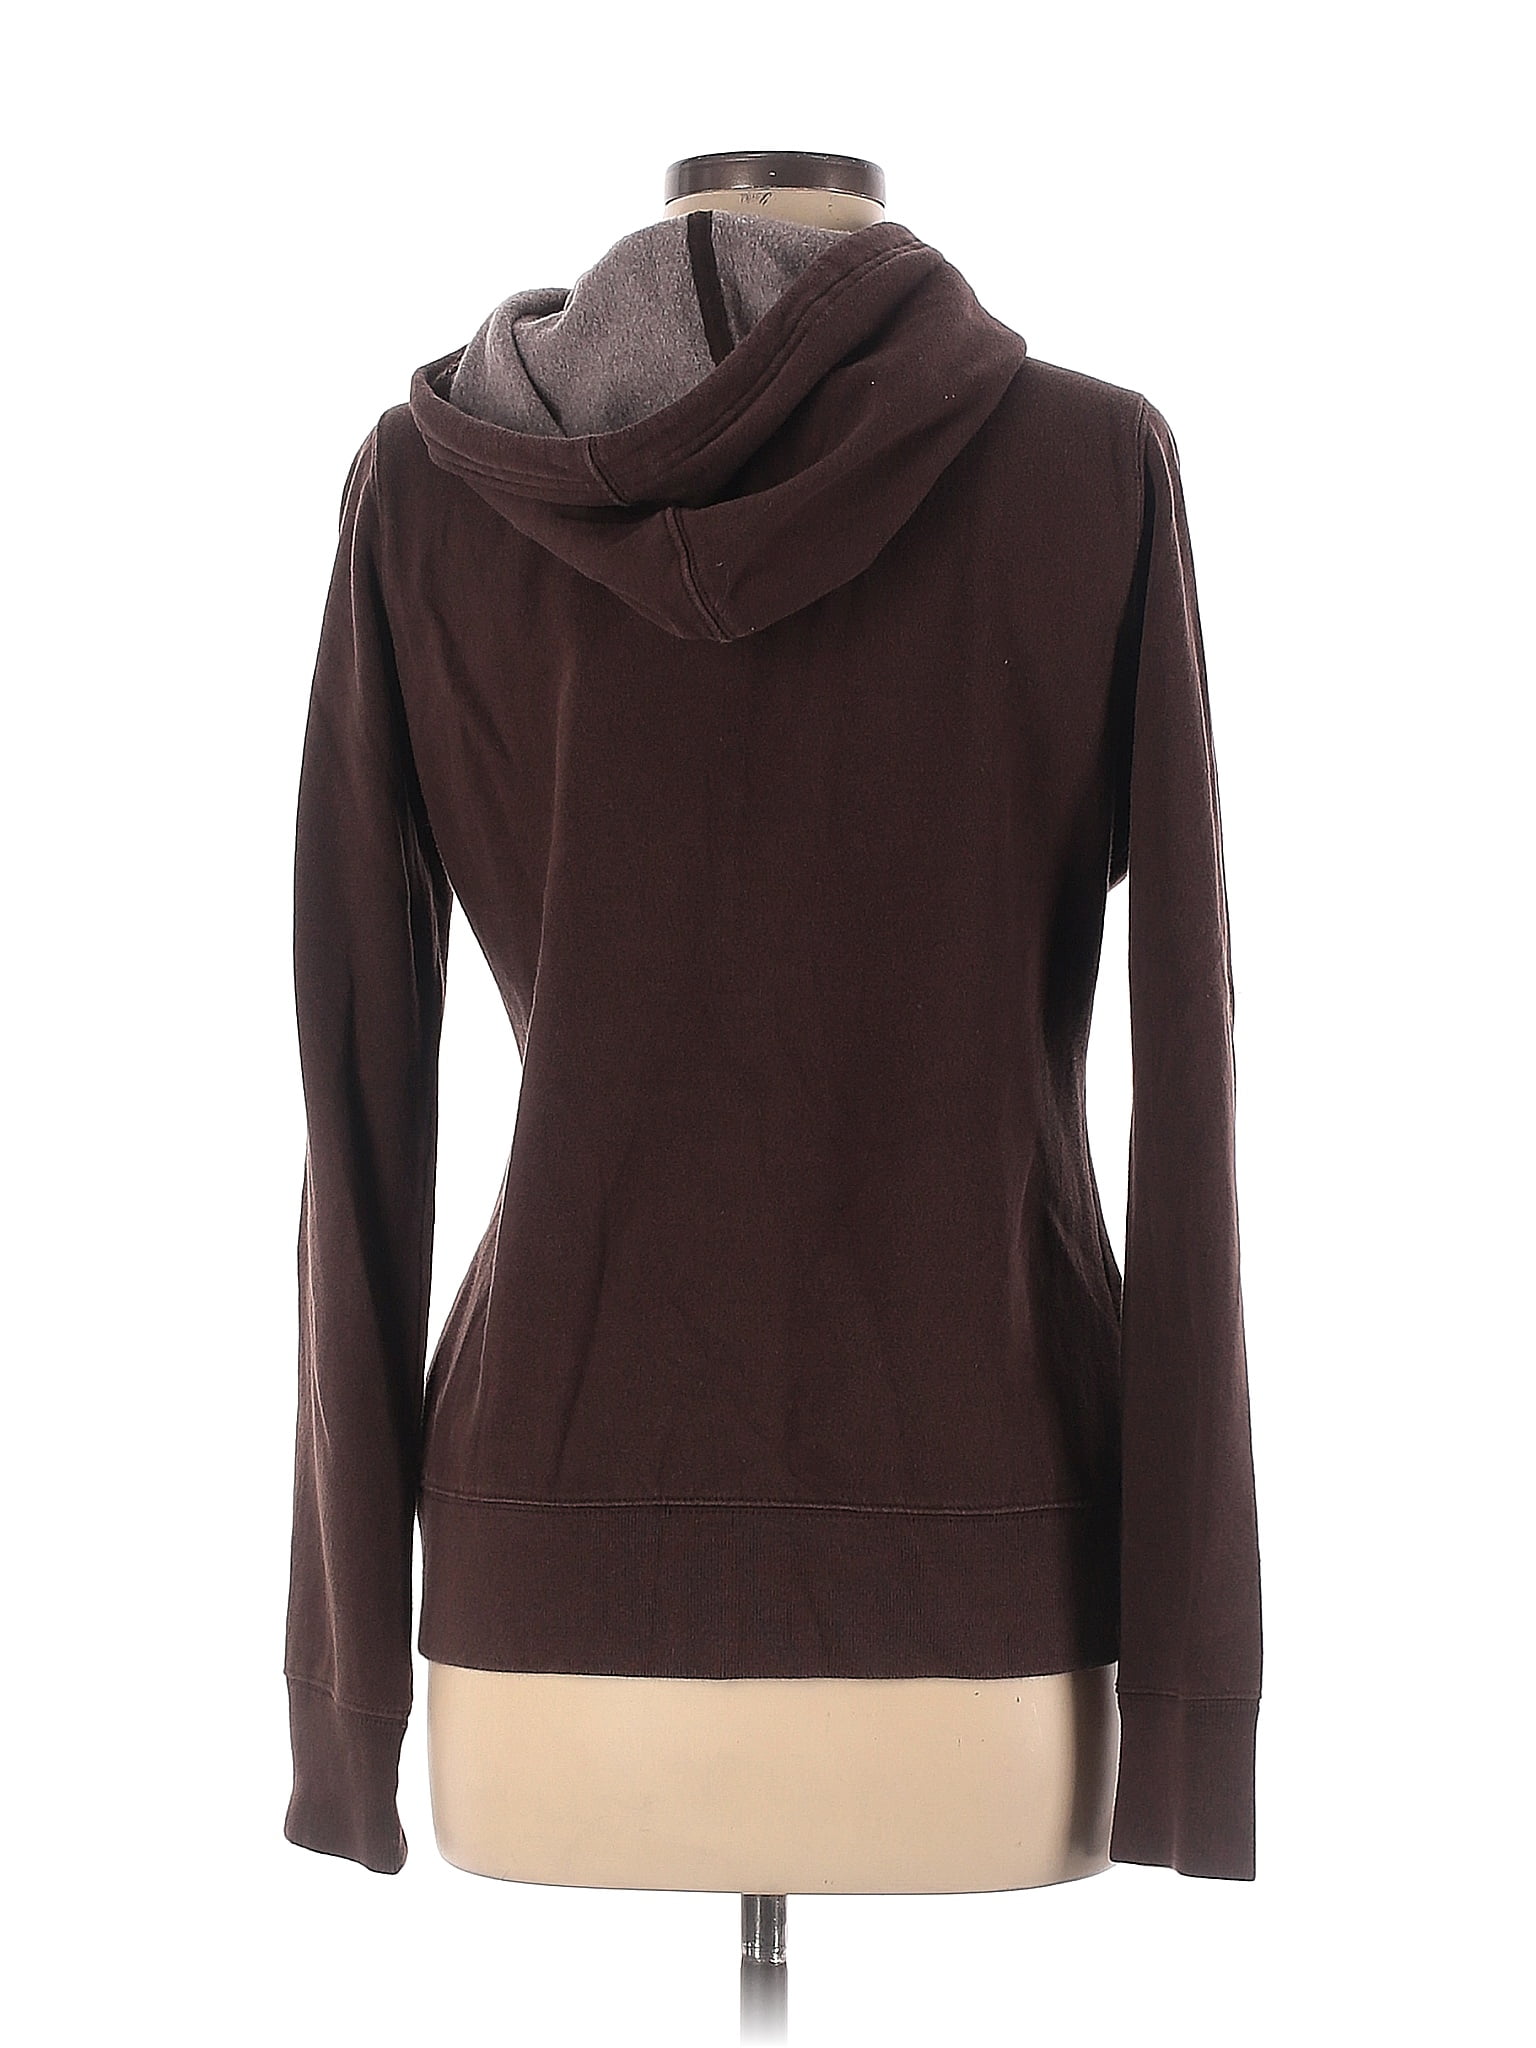 Lucky Brand Solid Brown Zip Up Hoodie Size M - 67% off